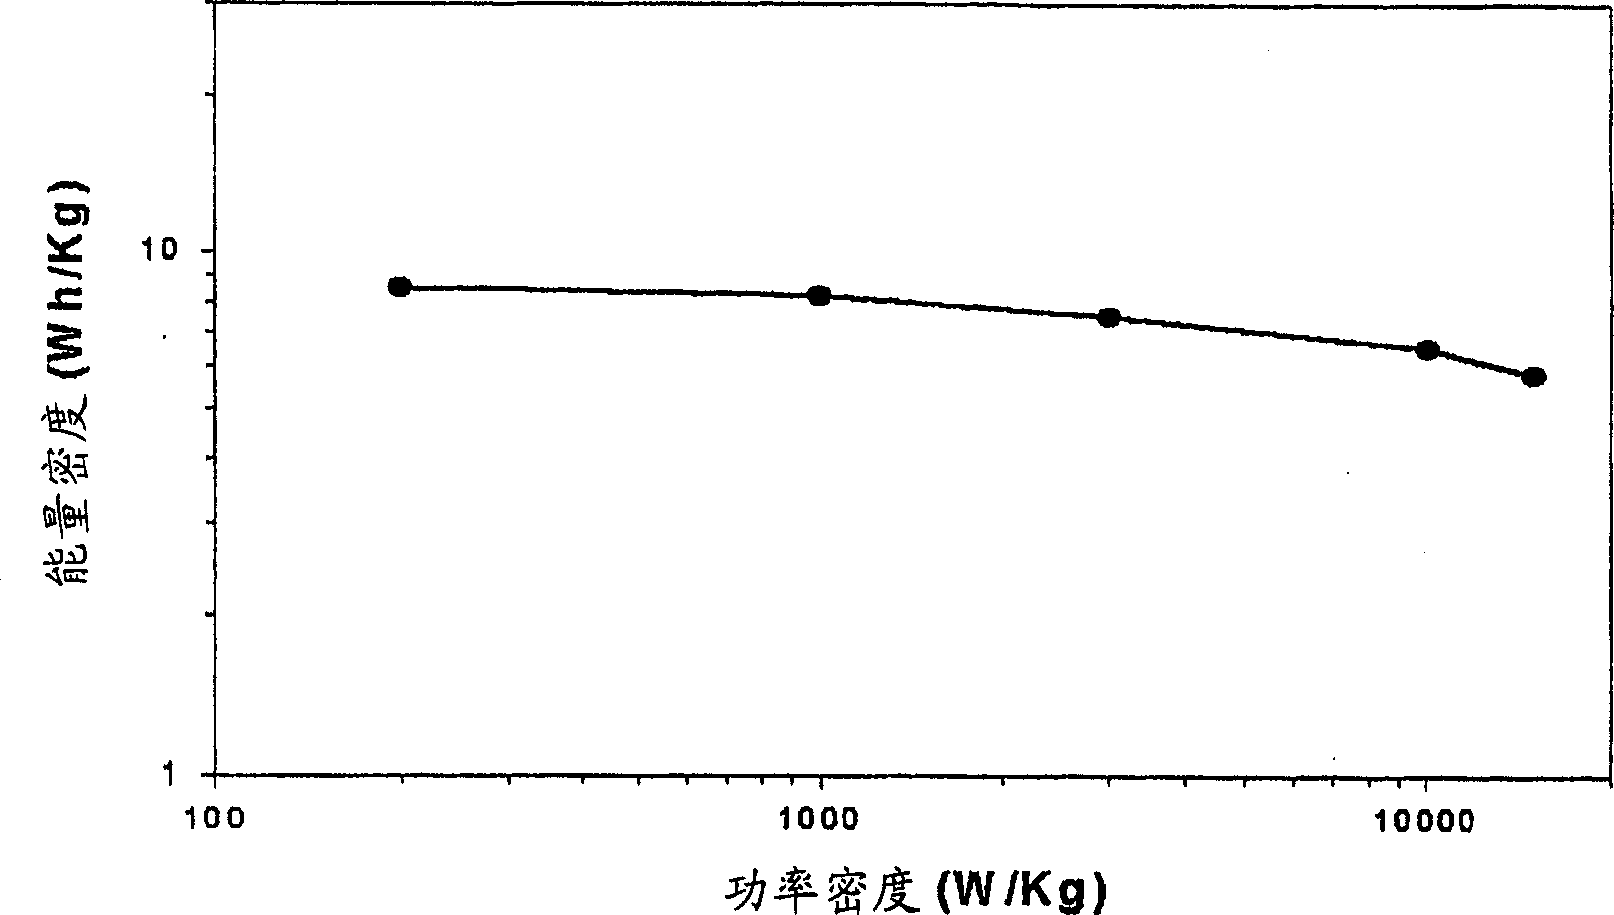 Carbon nanotube or carbon nanofiber electrode comprising sulfur or metal nanoparticles as a binder and process for preparing the same